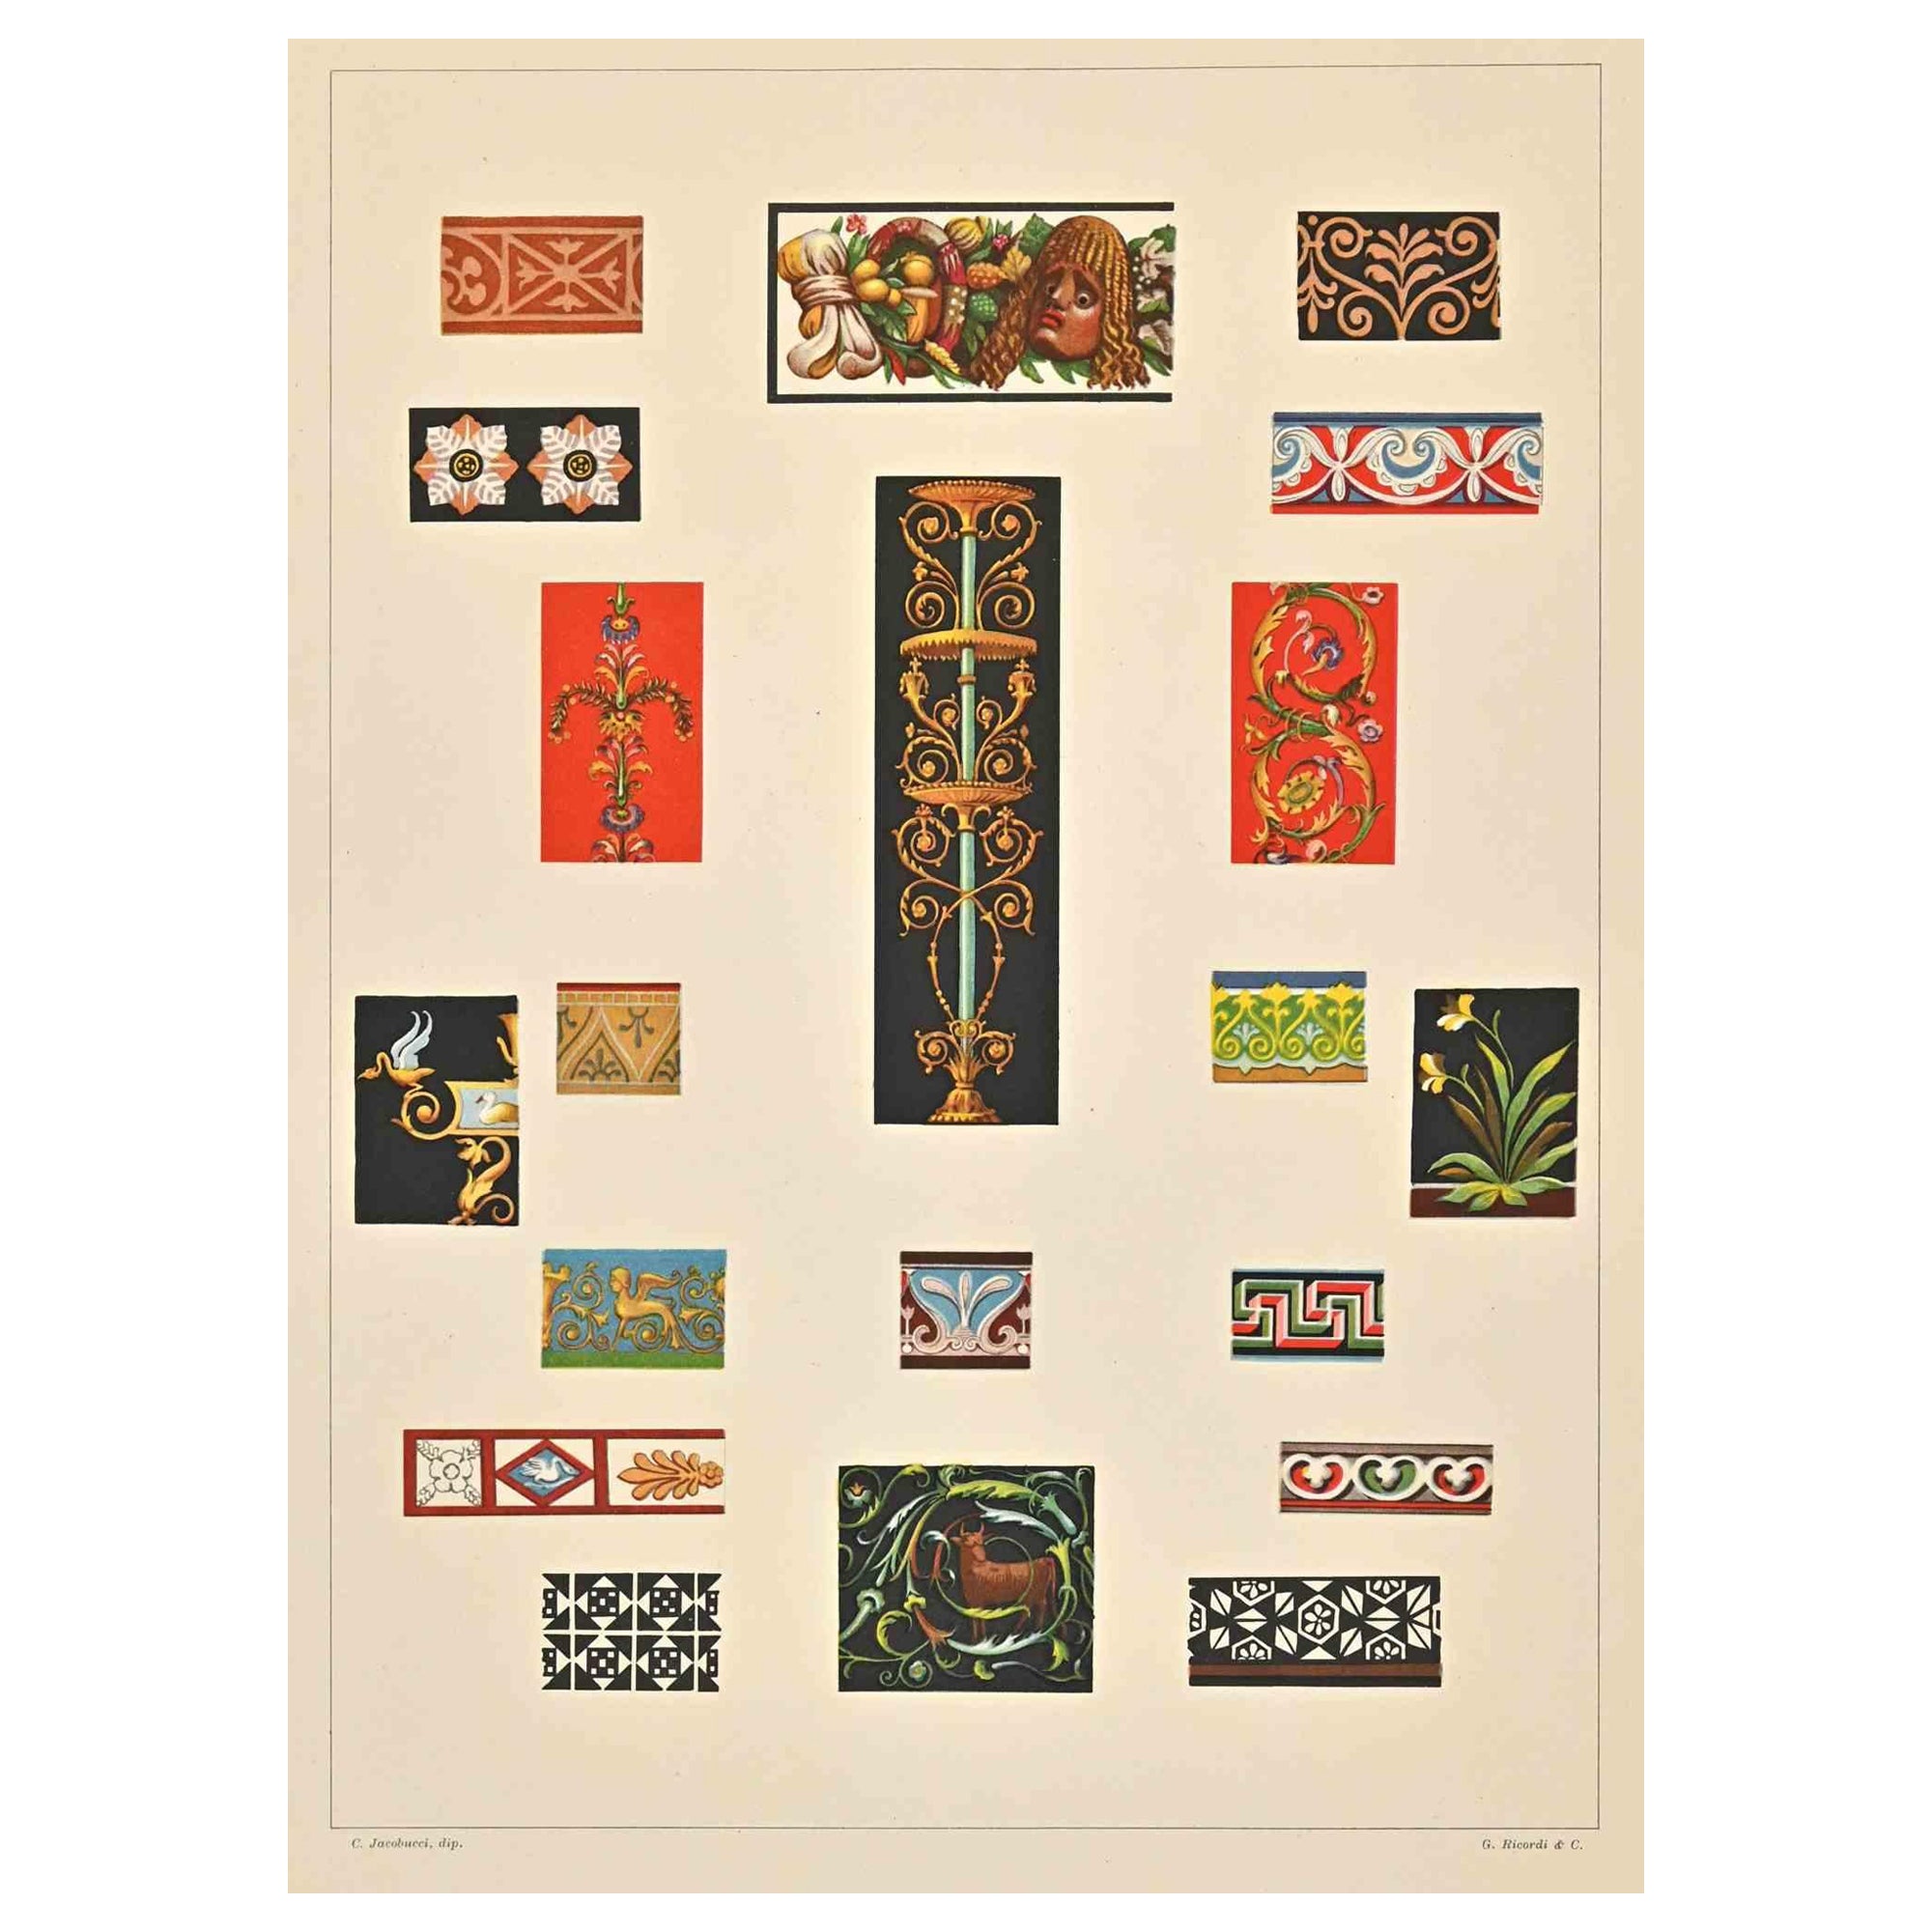 Decorative Motifs - Roman  Styles is a print on ivory-colored paper realized by  Carlo Jacobucci in the early 20th Century. Signed on the plate on the lower.

Vintage Chromolithograph.

Very good conditions.

The artwork represents Decorative motifs